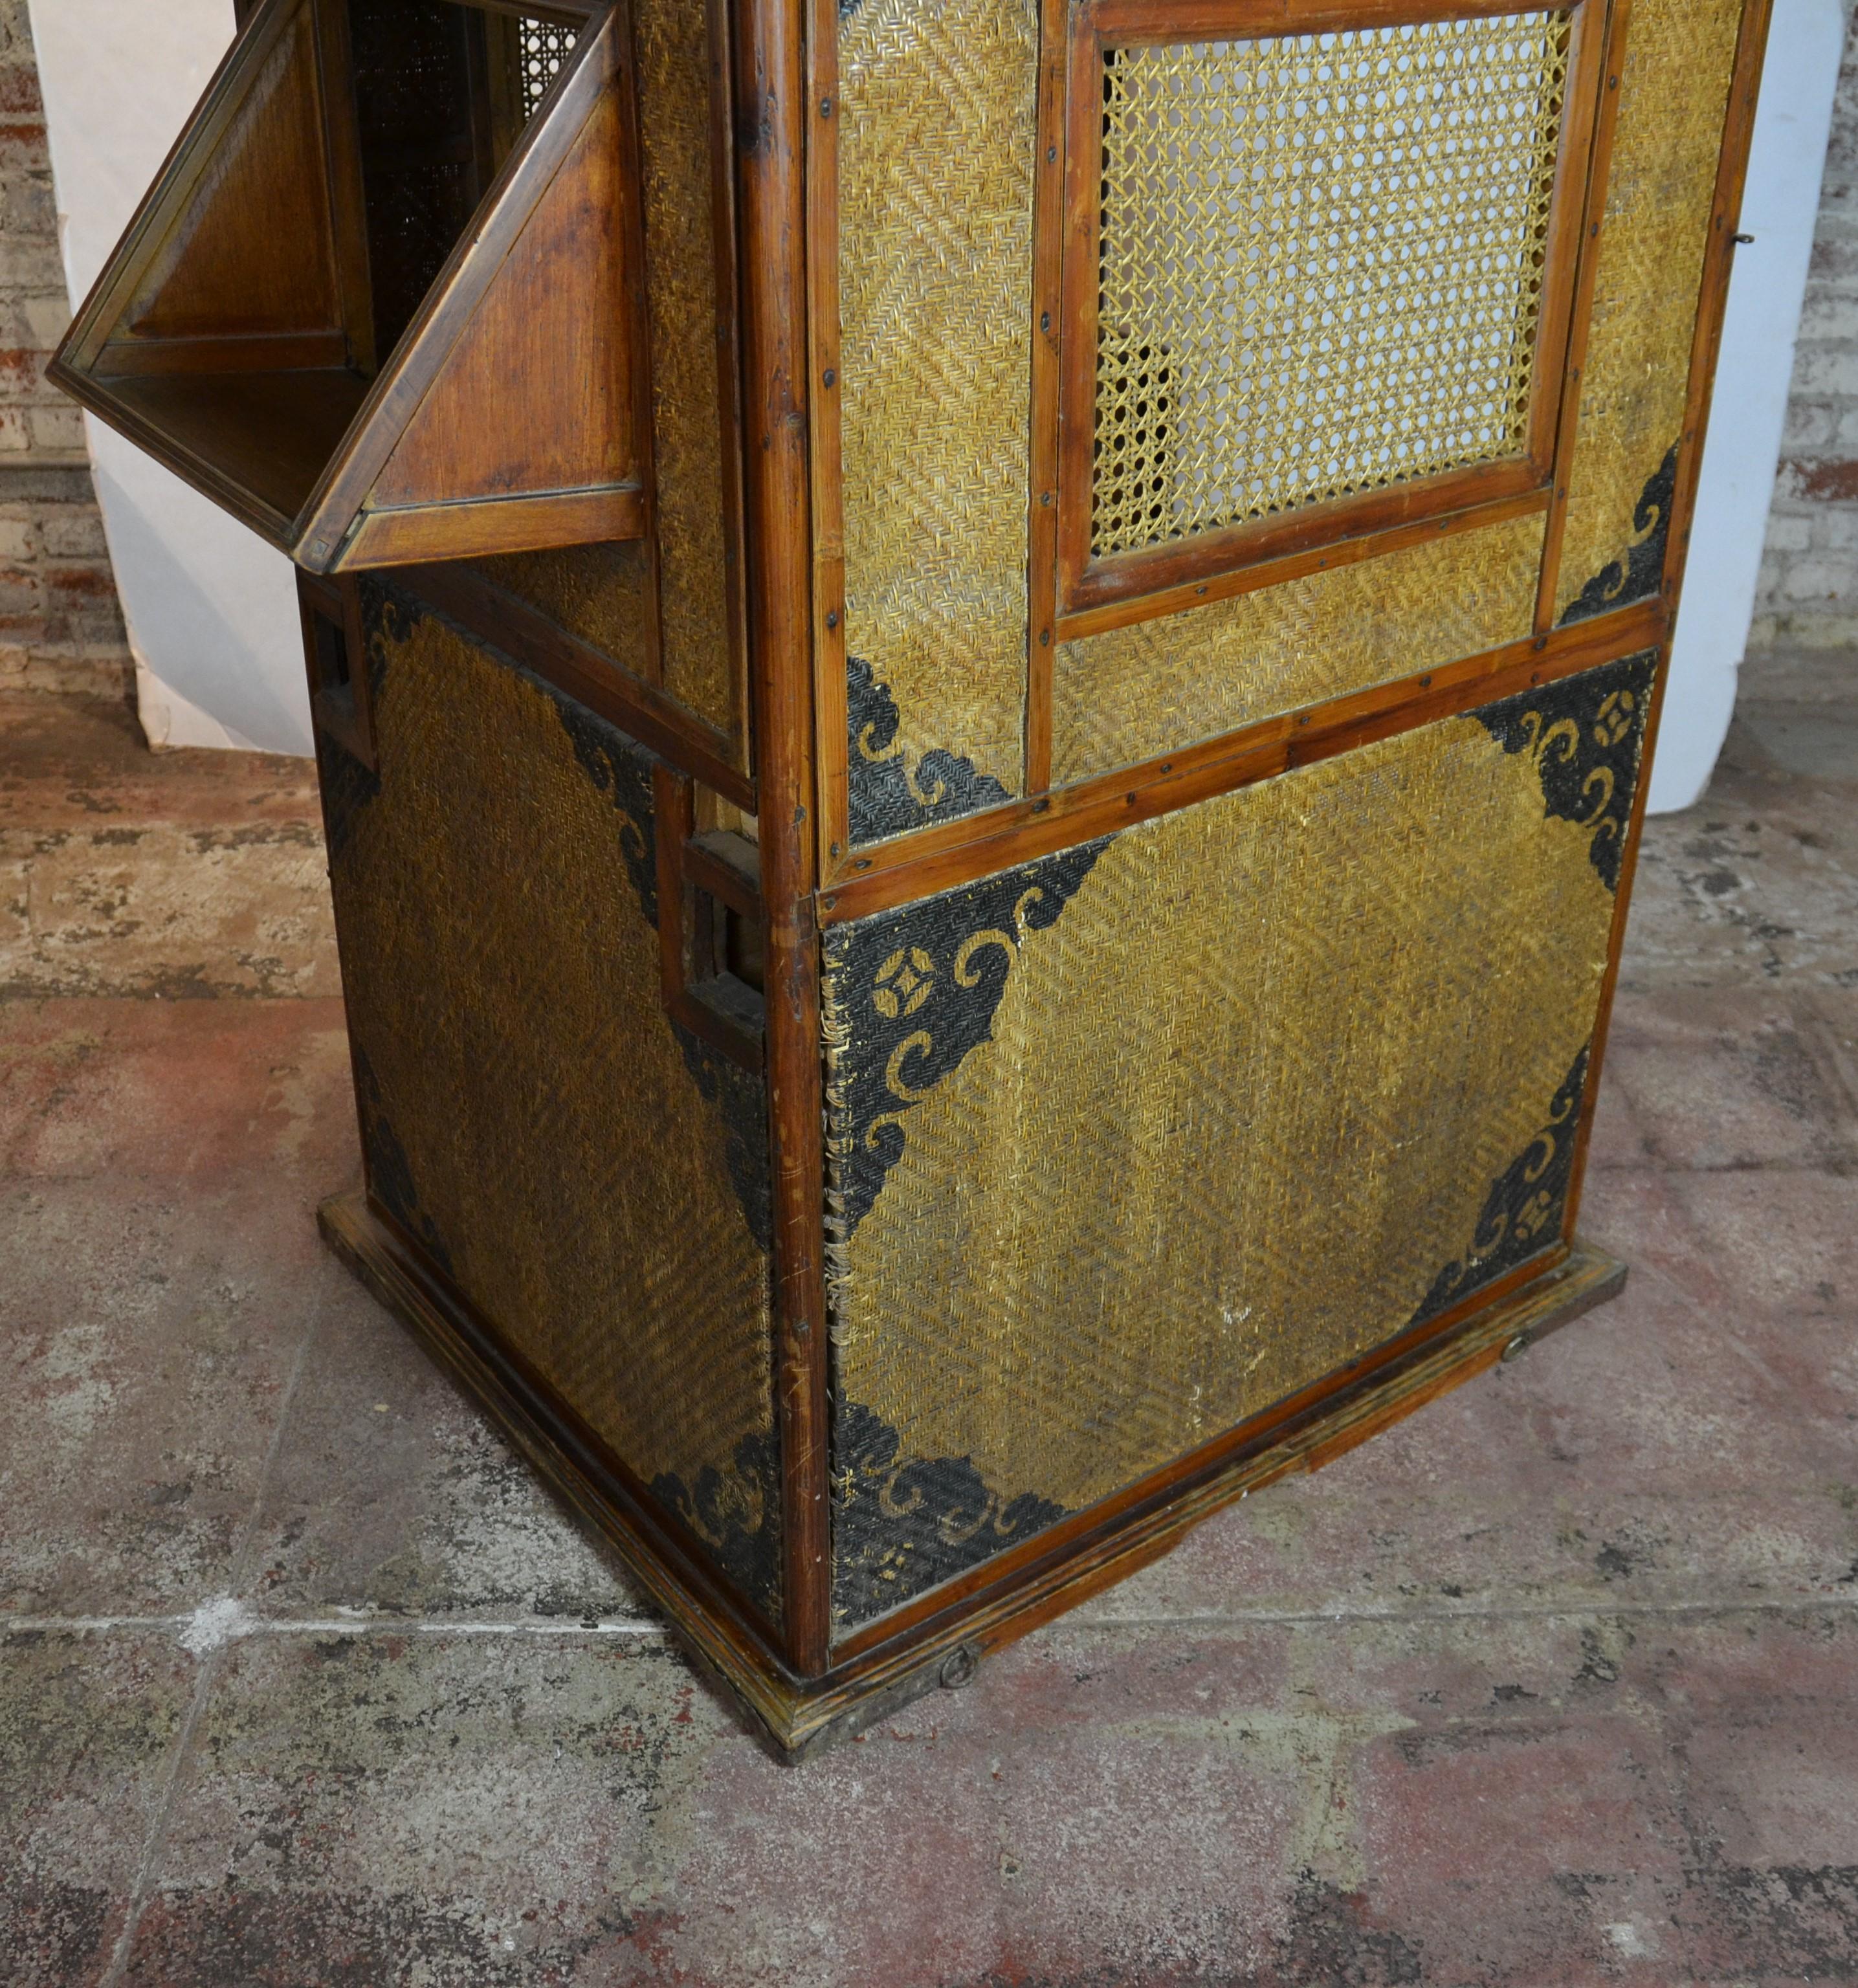 This sedan chair is made from bamboo and cane which was used by commoners. Does not come with poles.